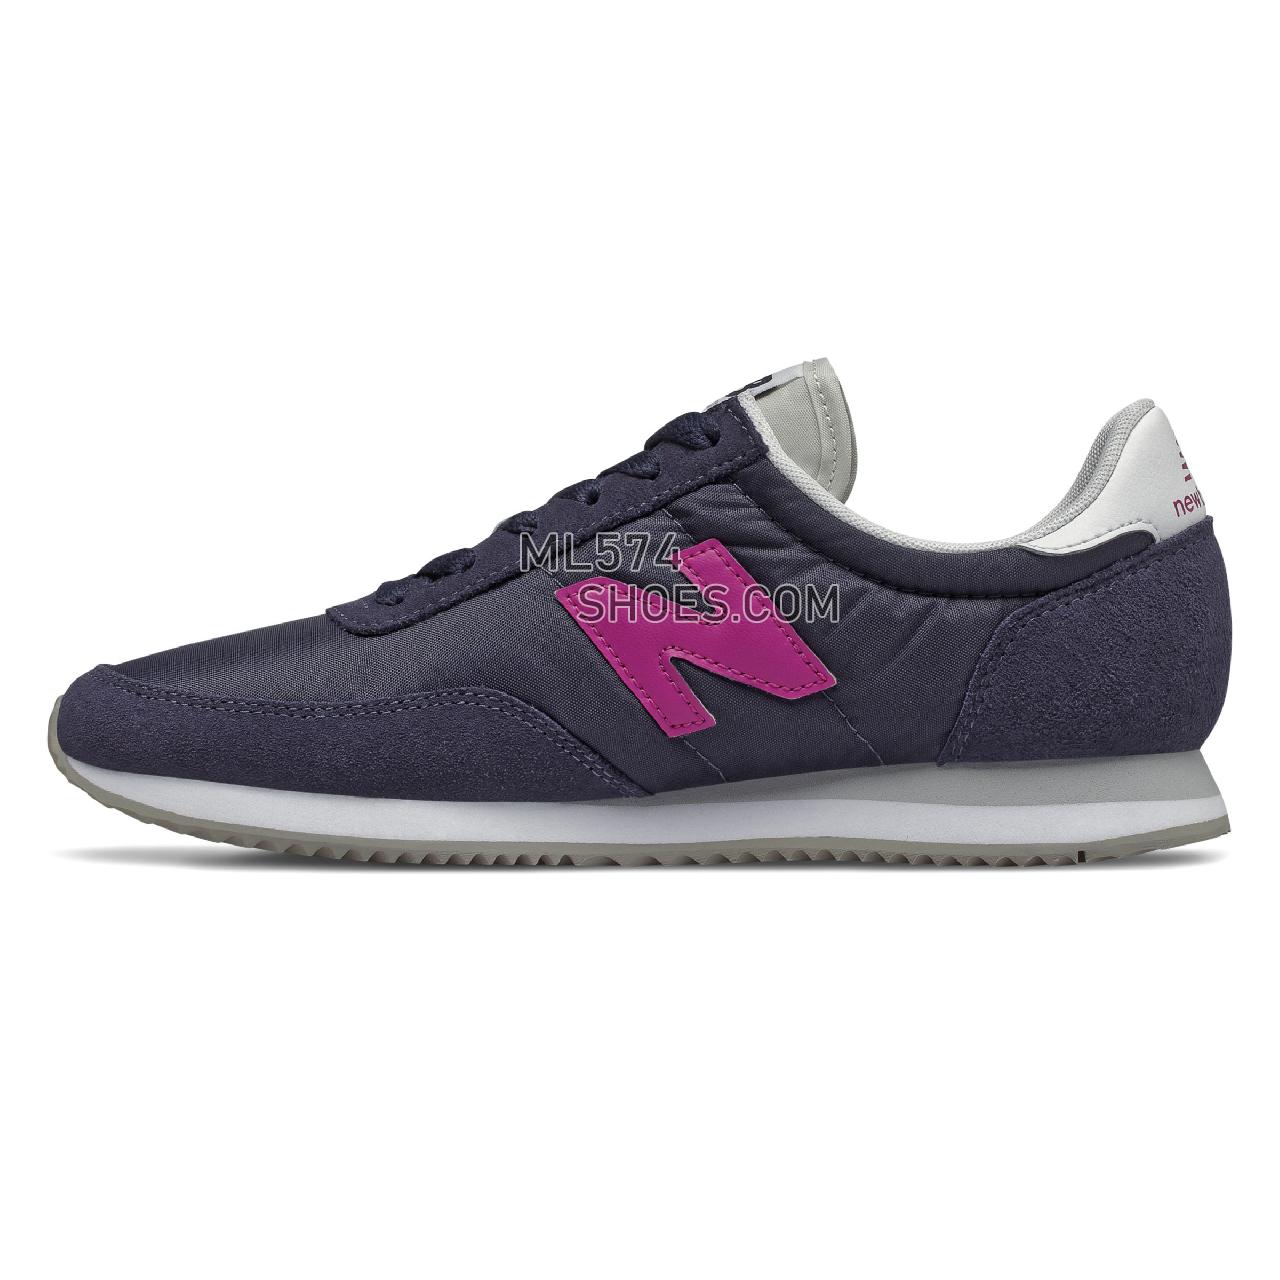 New Balance 720 - Women's Classic Sneakers - Pigment with Jewel - WL720ED